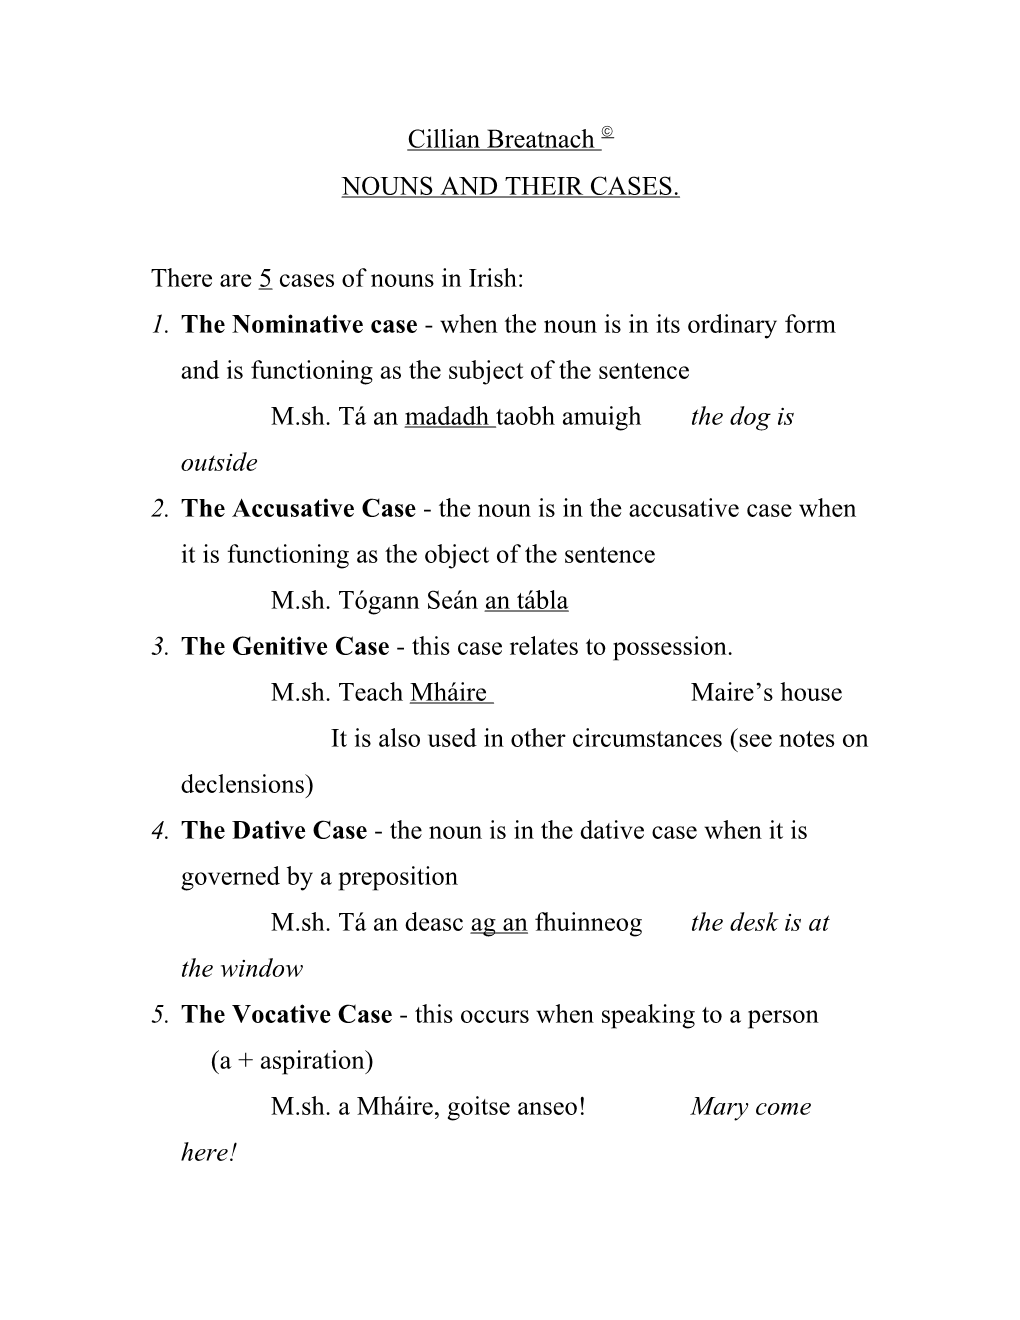 Nouns and Their Cases